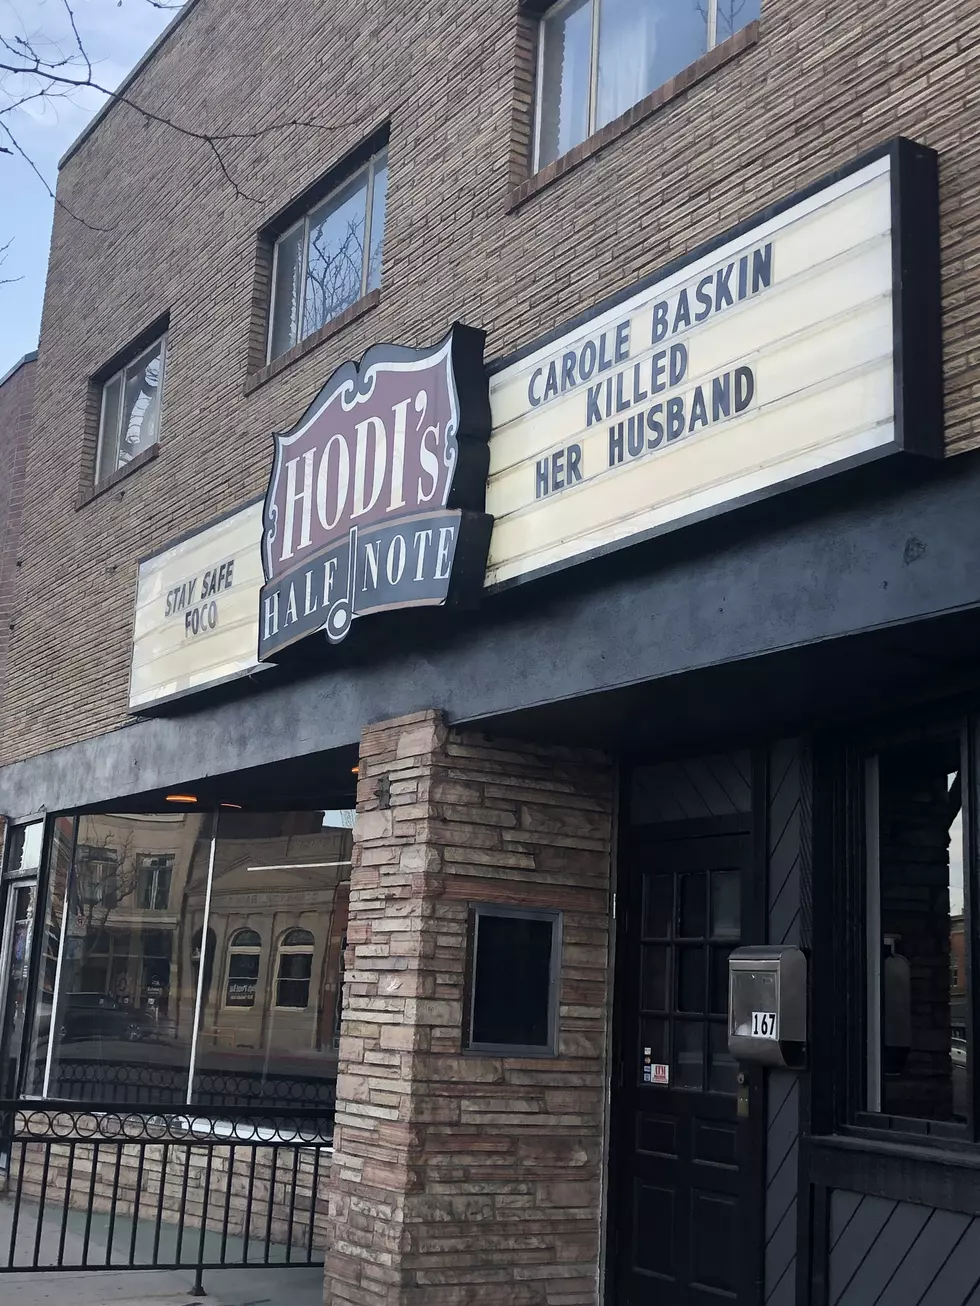 Tiger King: Yeah, Hodi’s Half Note in Fort Collins Went There